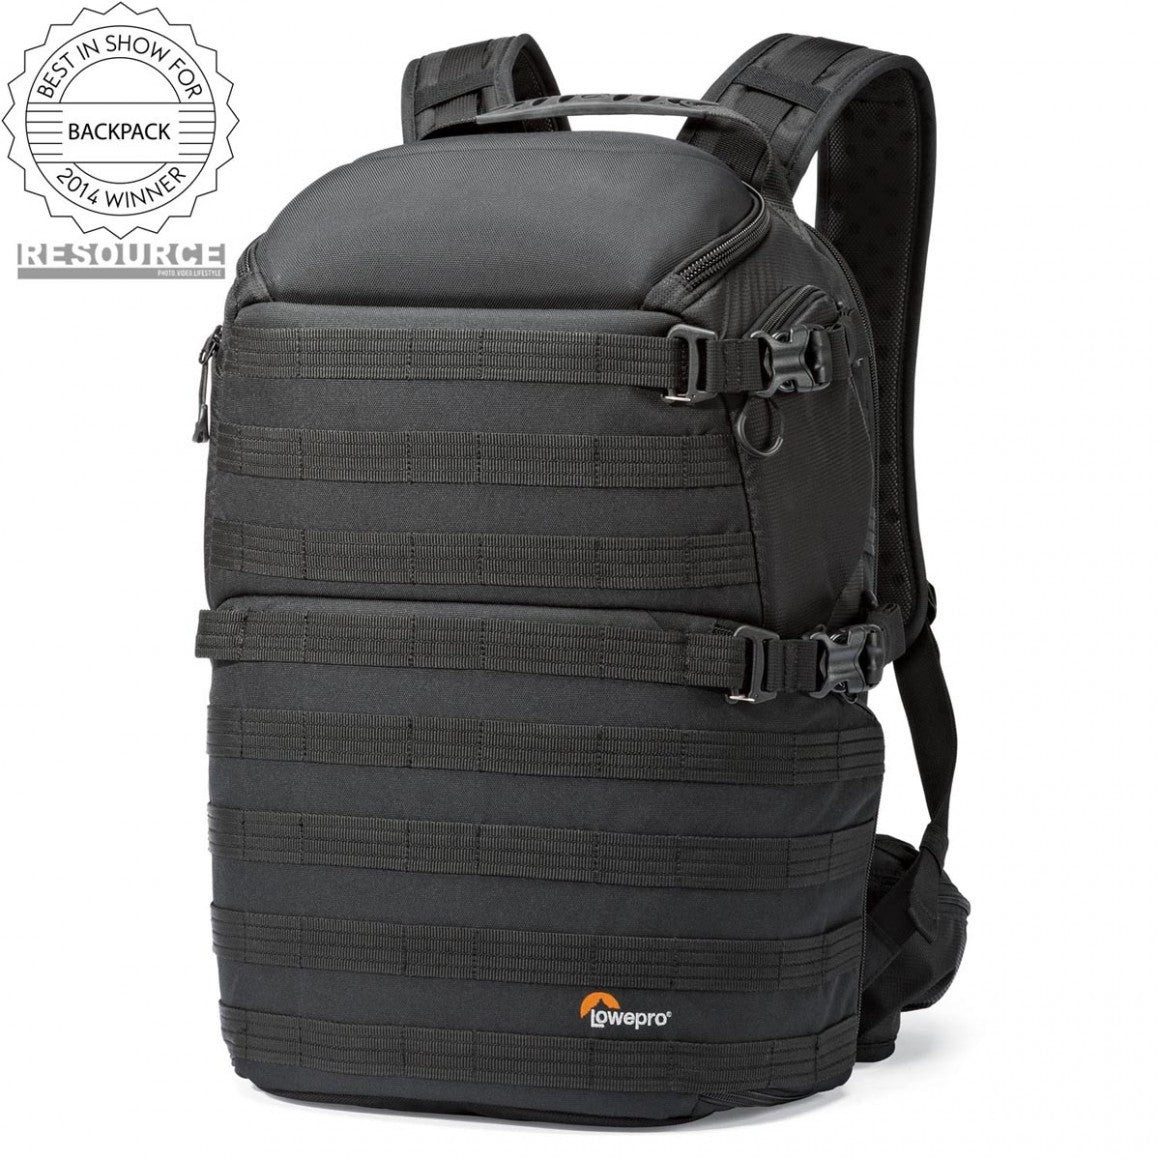 Lowepro Pro Tactic 450 AW Camera Bag, bags backpacks, Lowepro - Pictureline  - 1